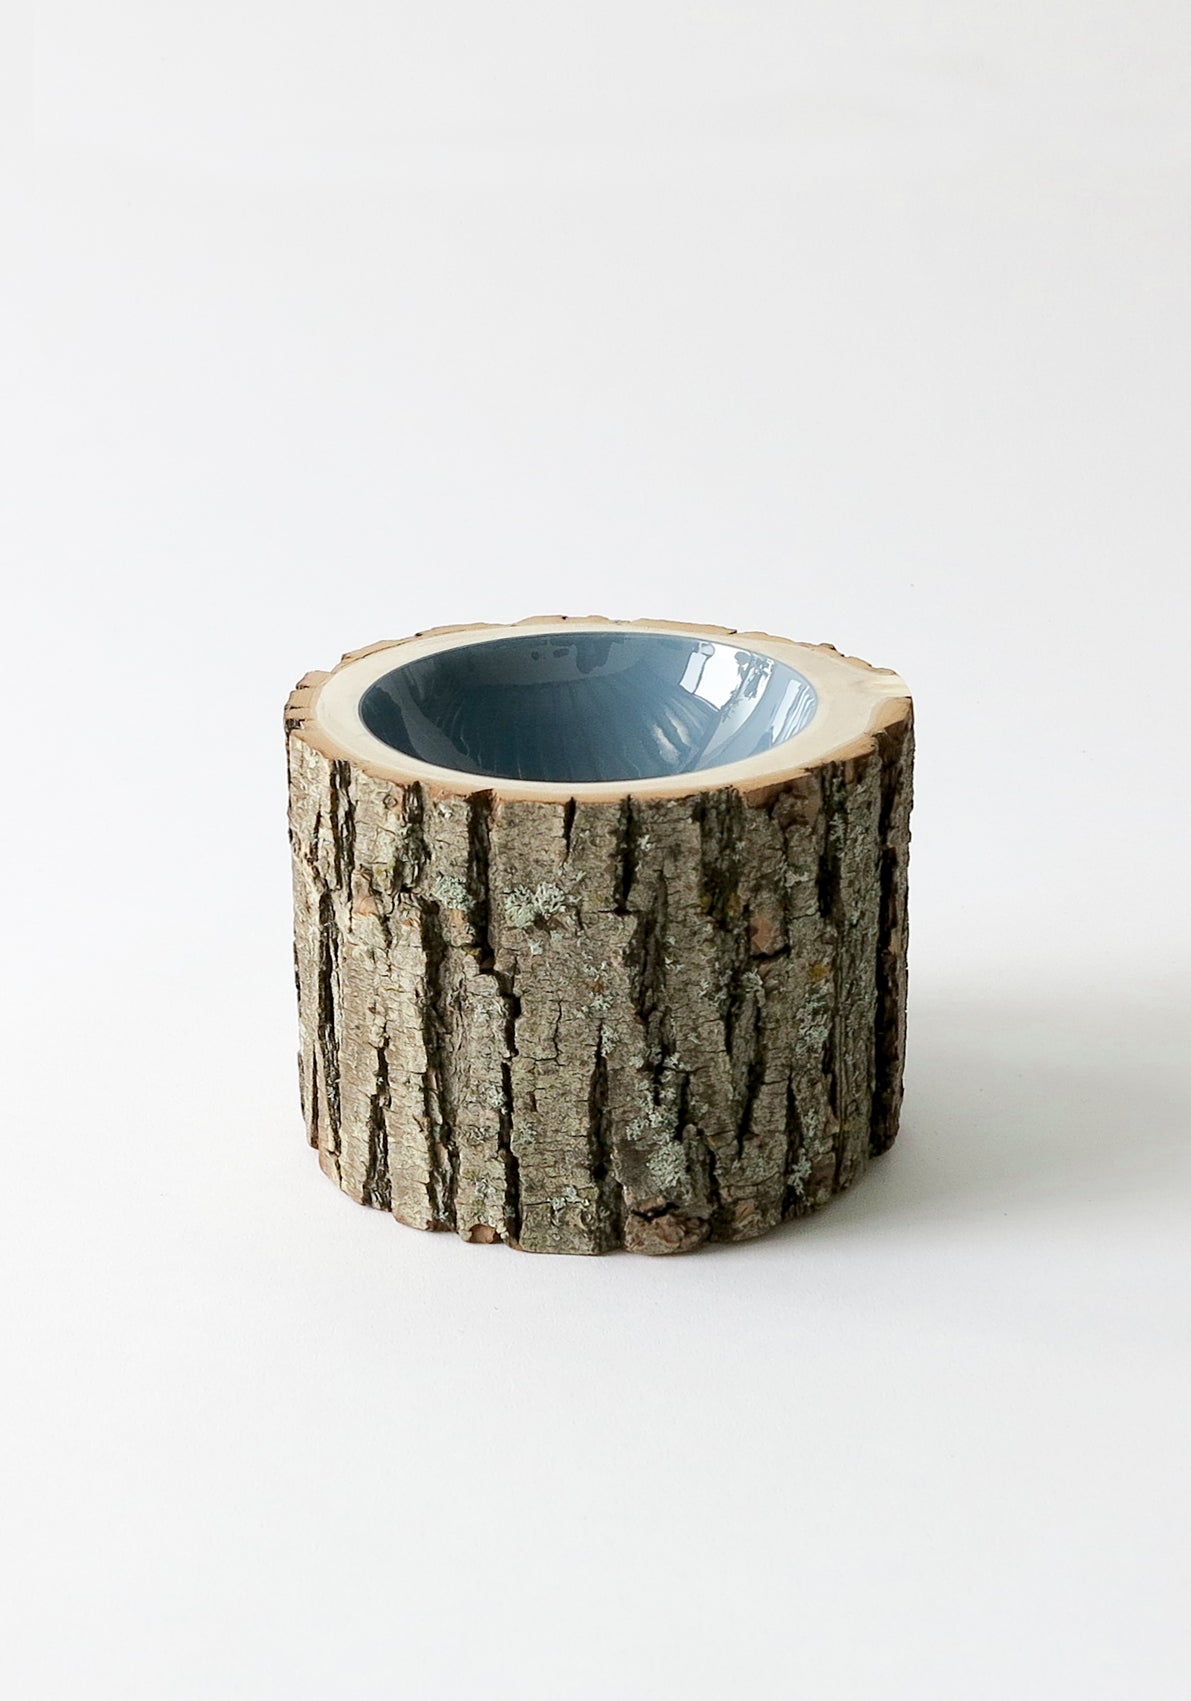 Size 5 Log Bowl - medium wooden bowl with rough bark, glossy interior is a denim dusty blue colour.